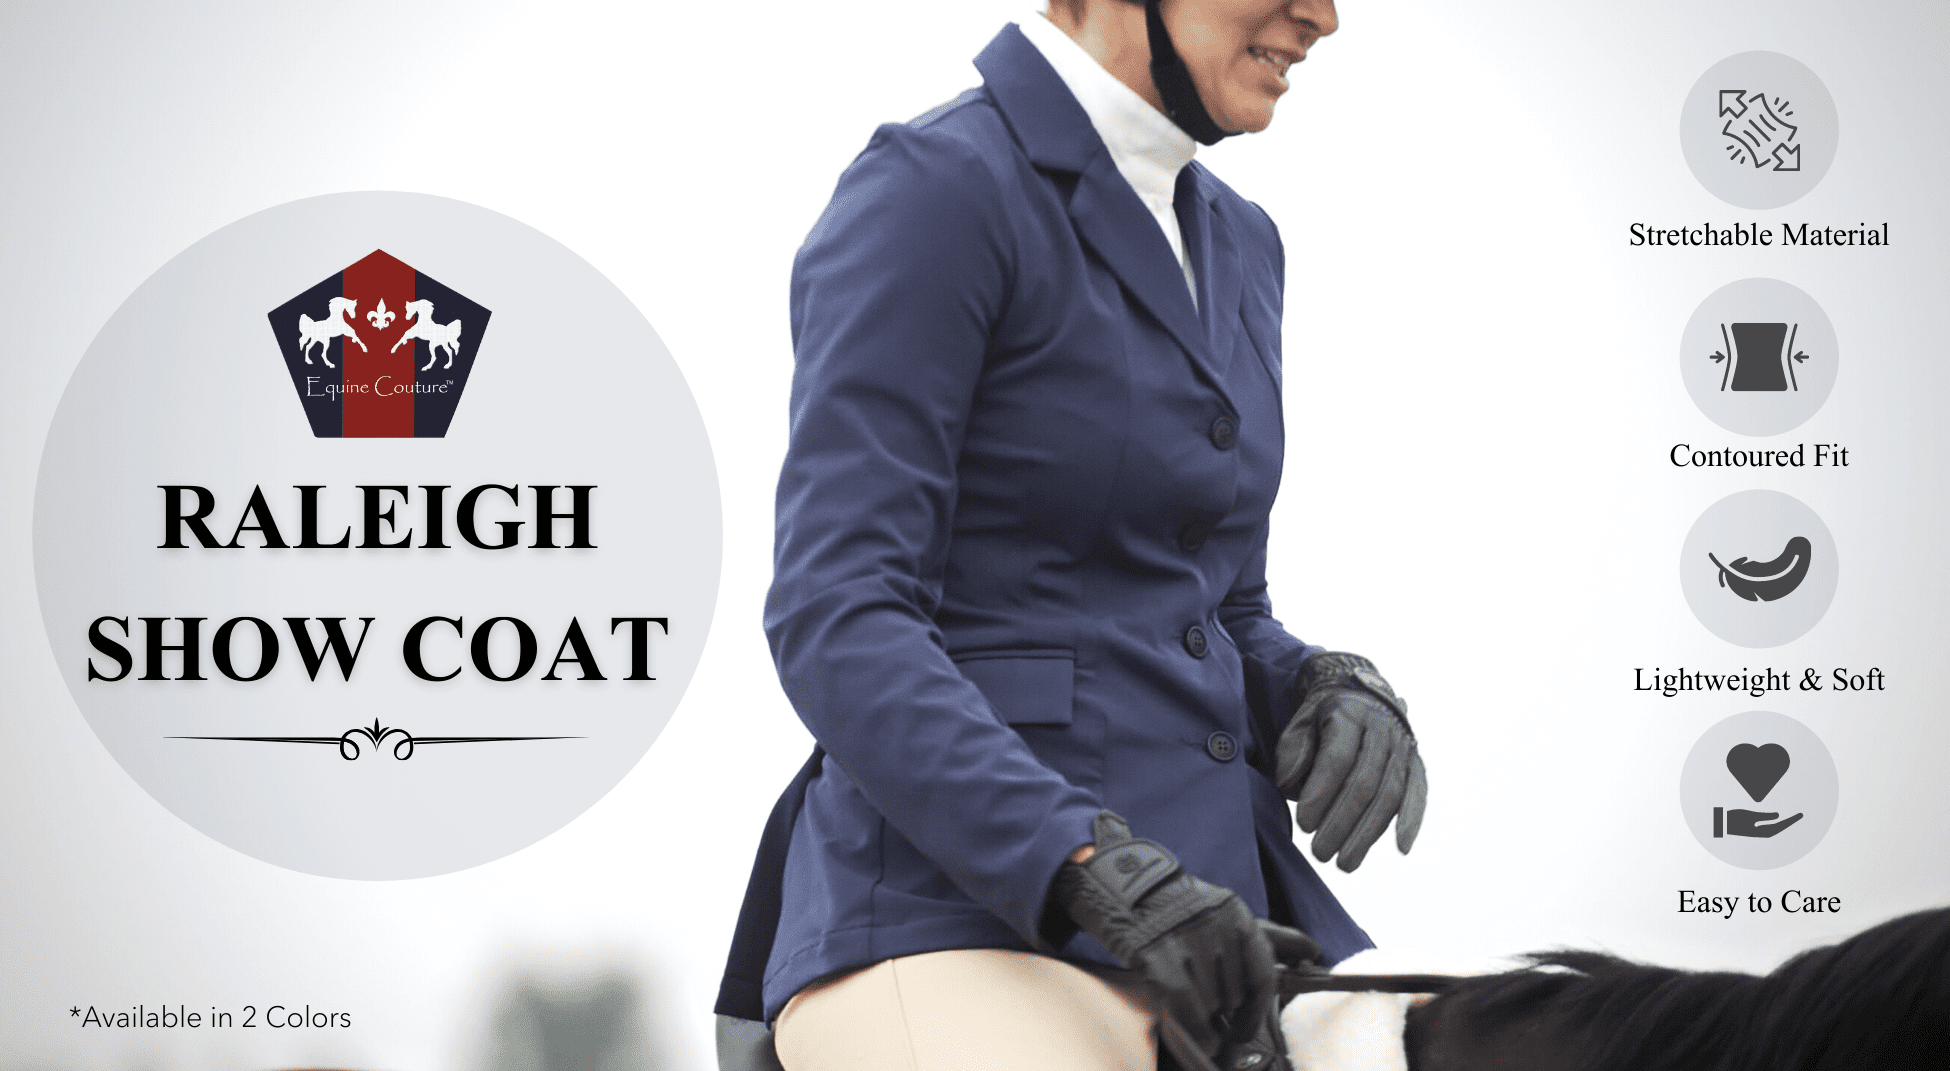 Equine Couture Ladies Raleigh Show Coat - Breeches.com